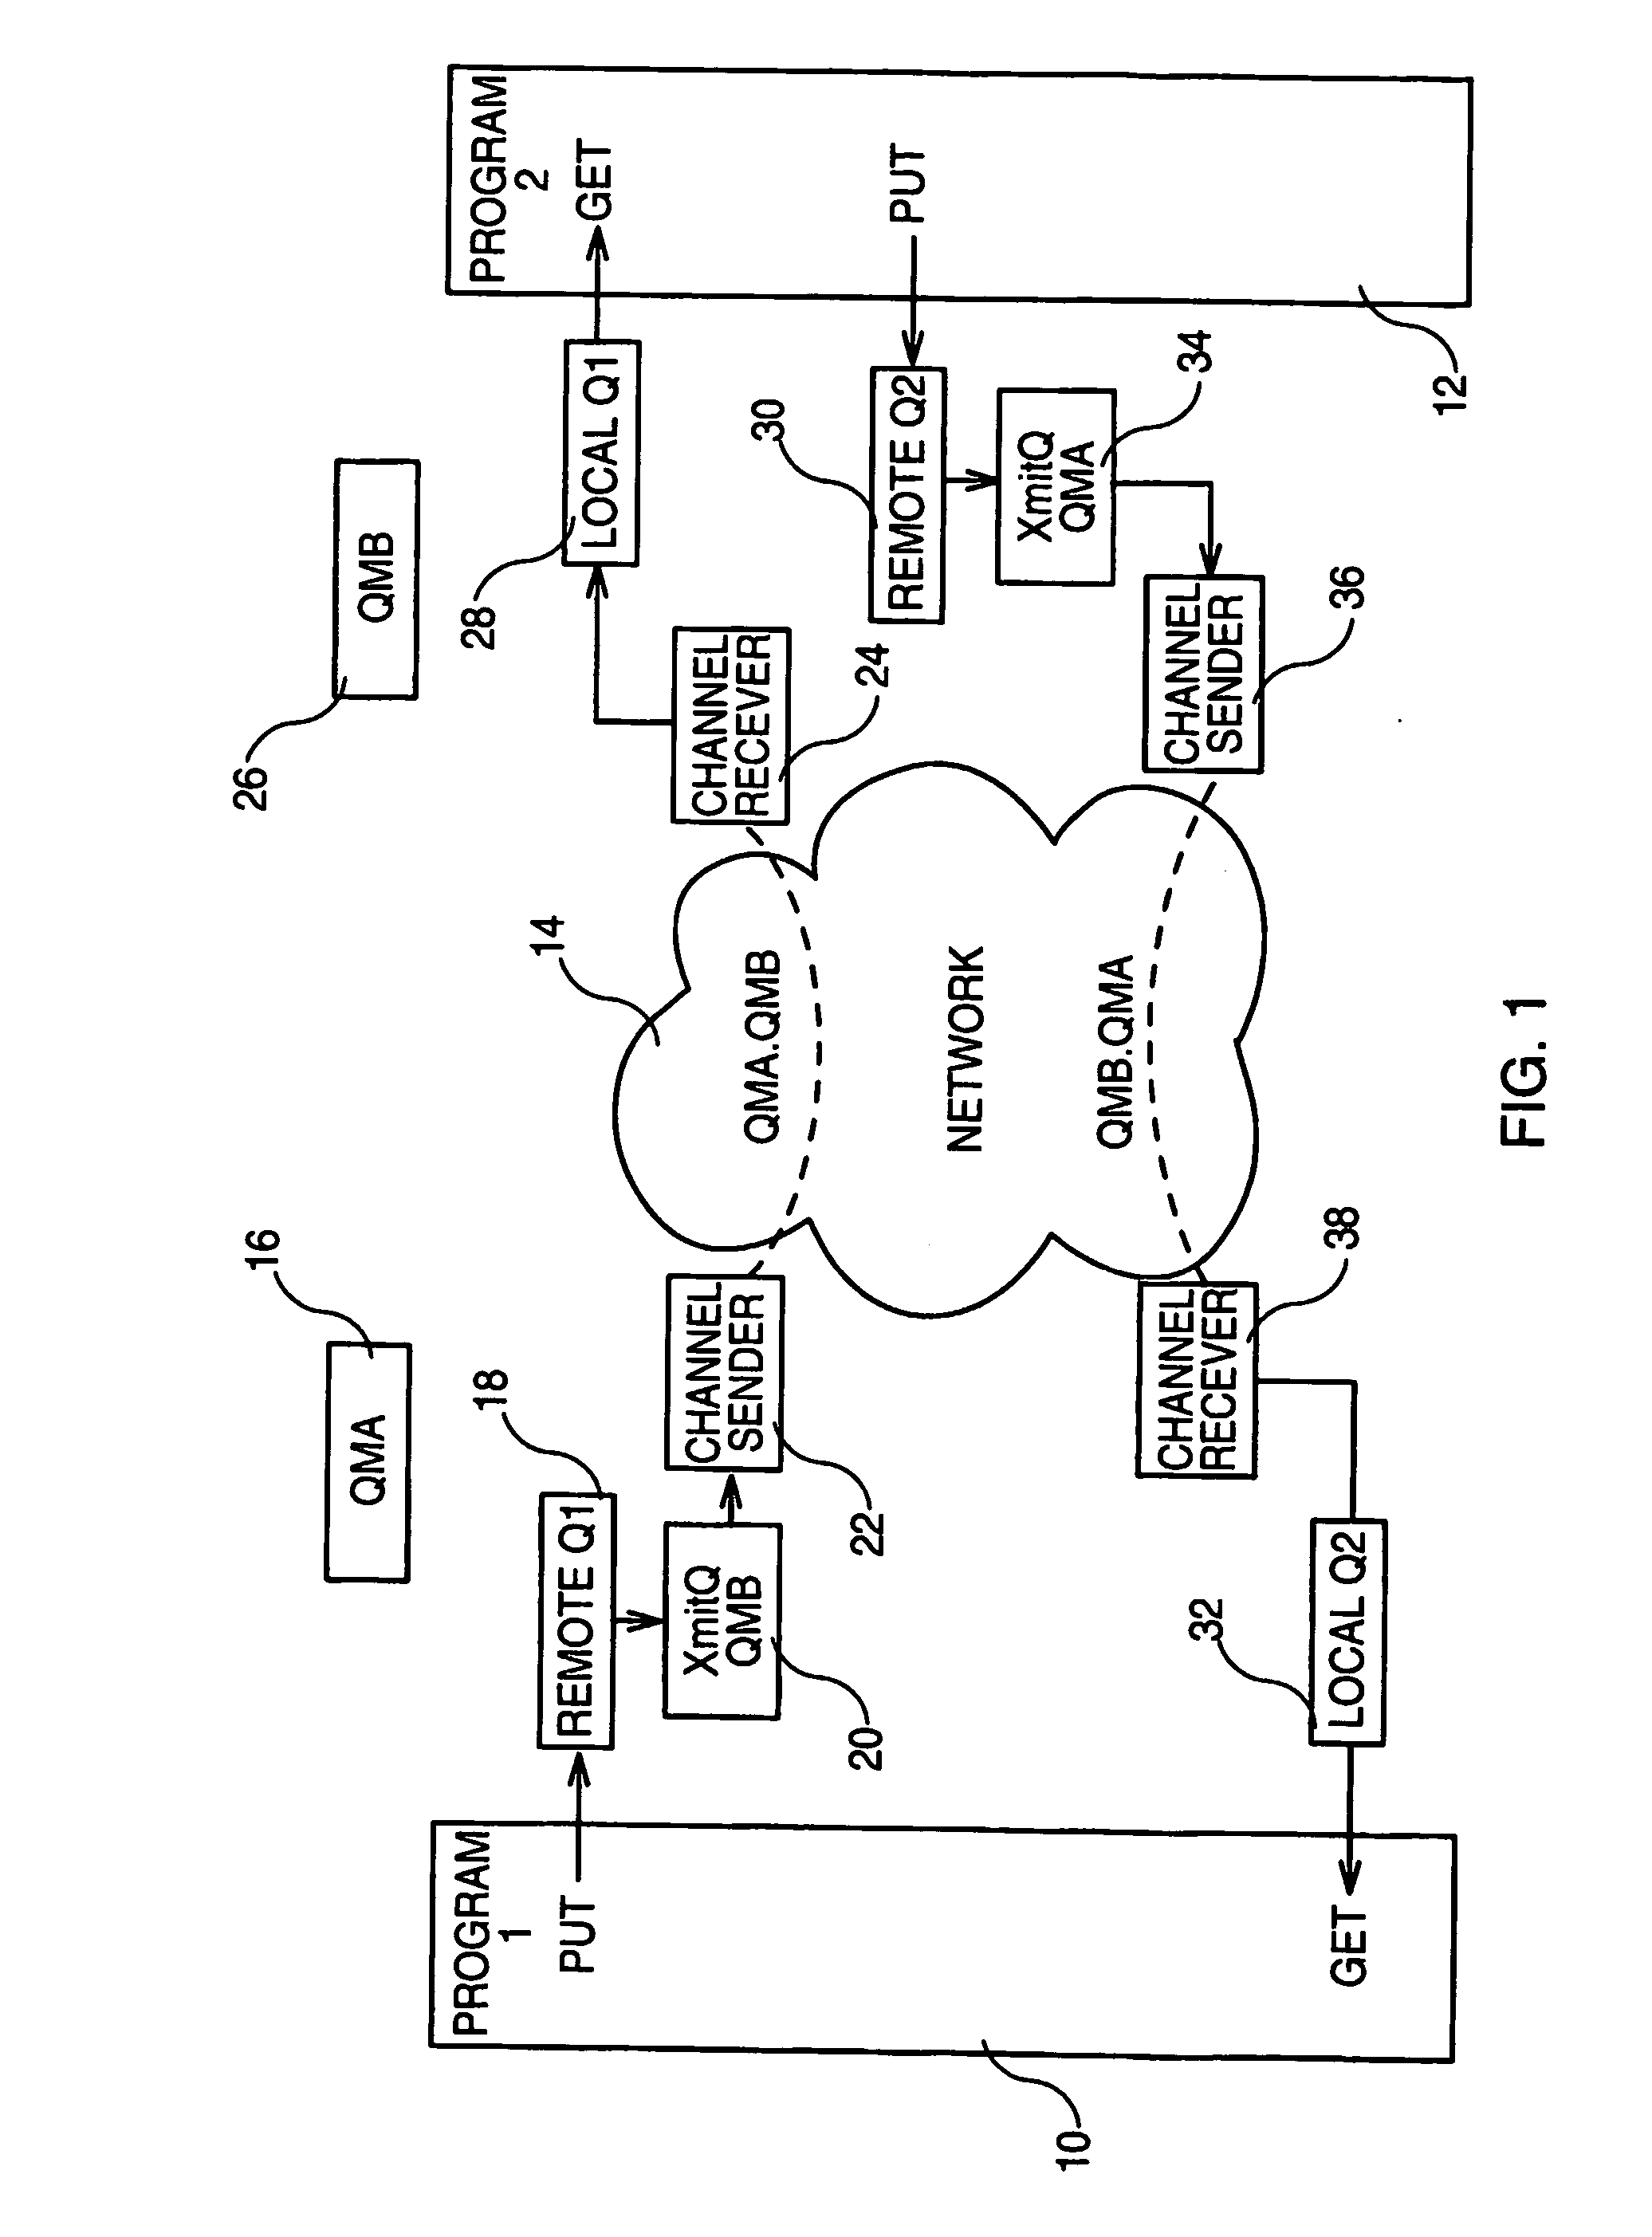 System for defining an alternate channel routing mechanism in a messaging middleware environment